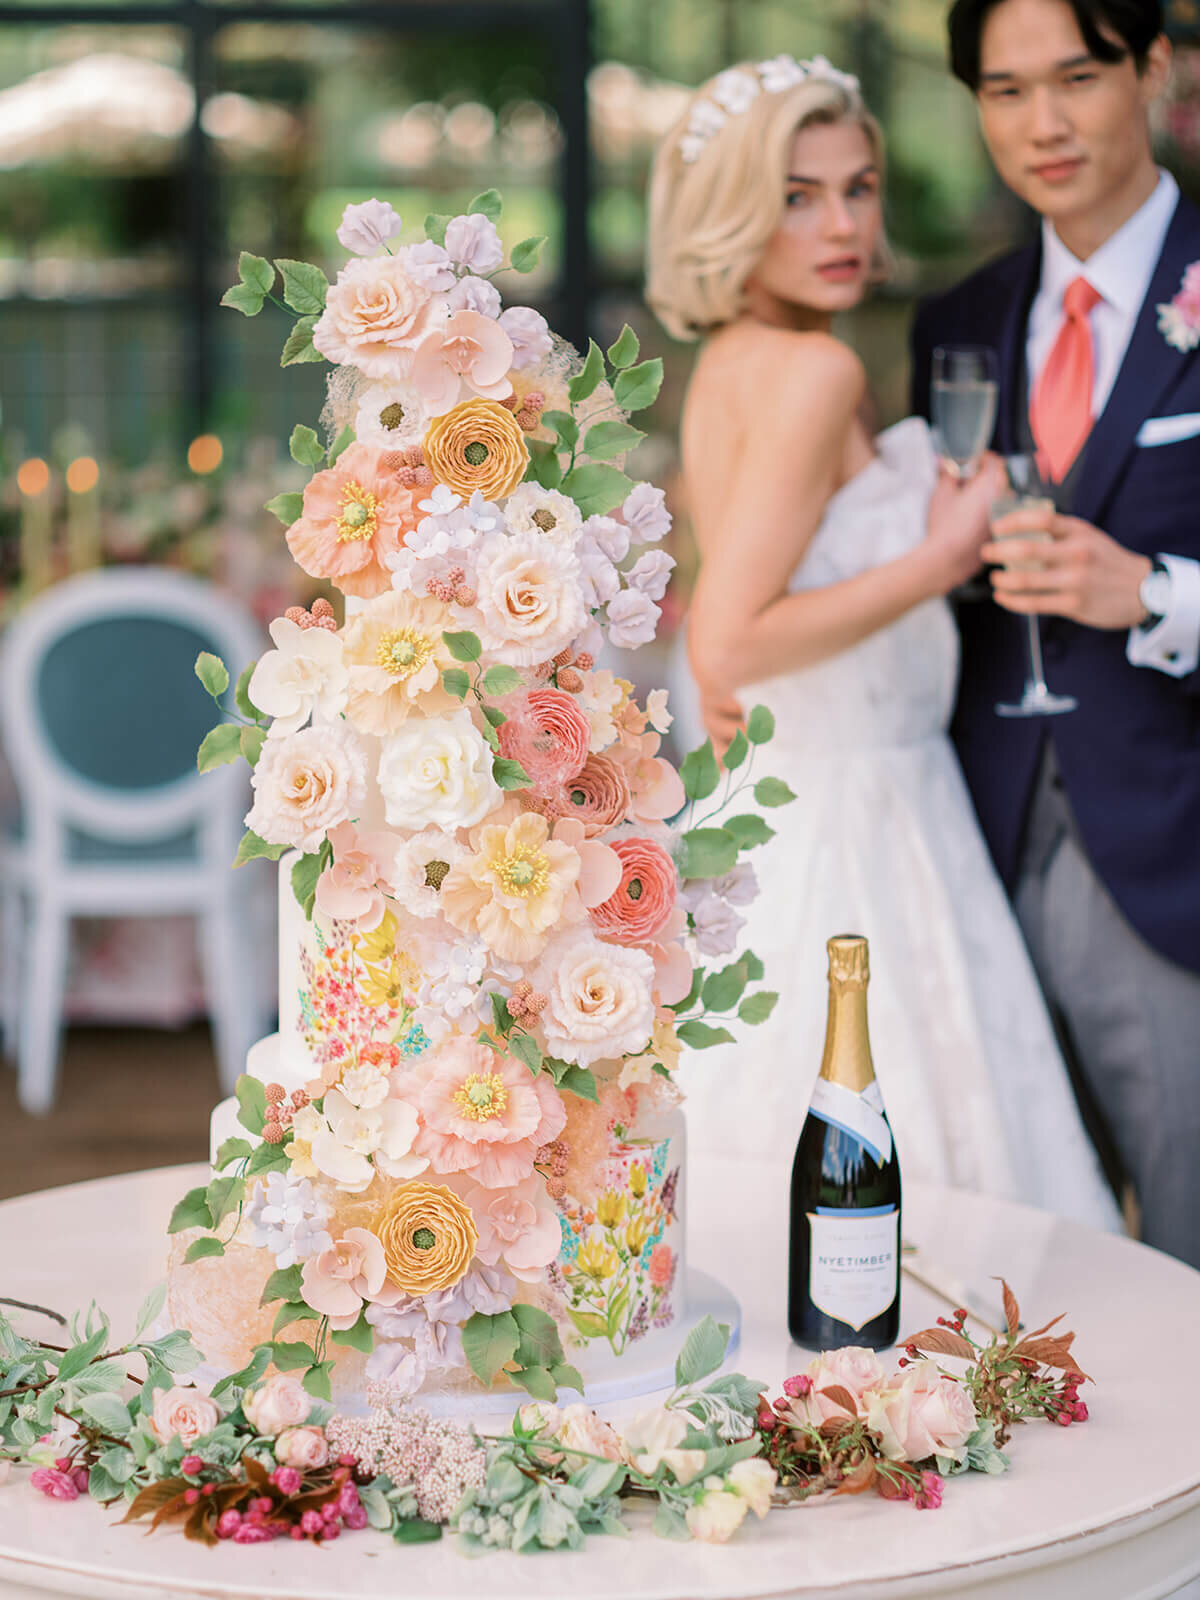 bride and groom standing behind luxury wedding cake which is decorated with elaborate pink and peach sugar flowers at blenheim palace